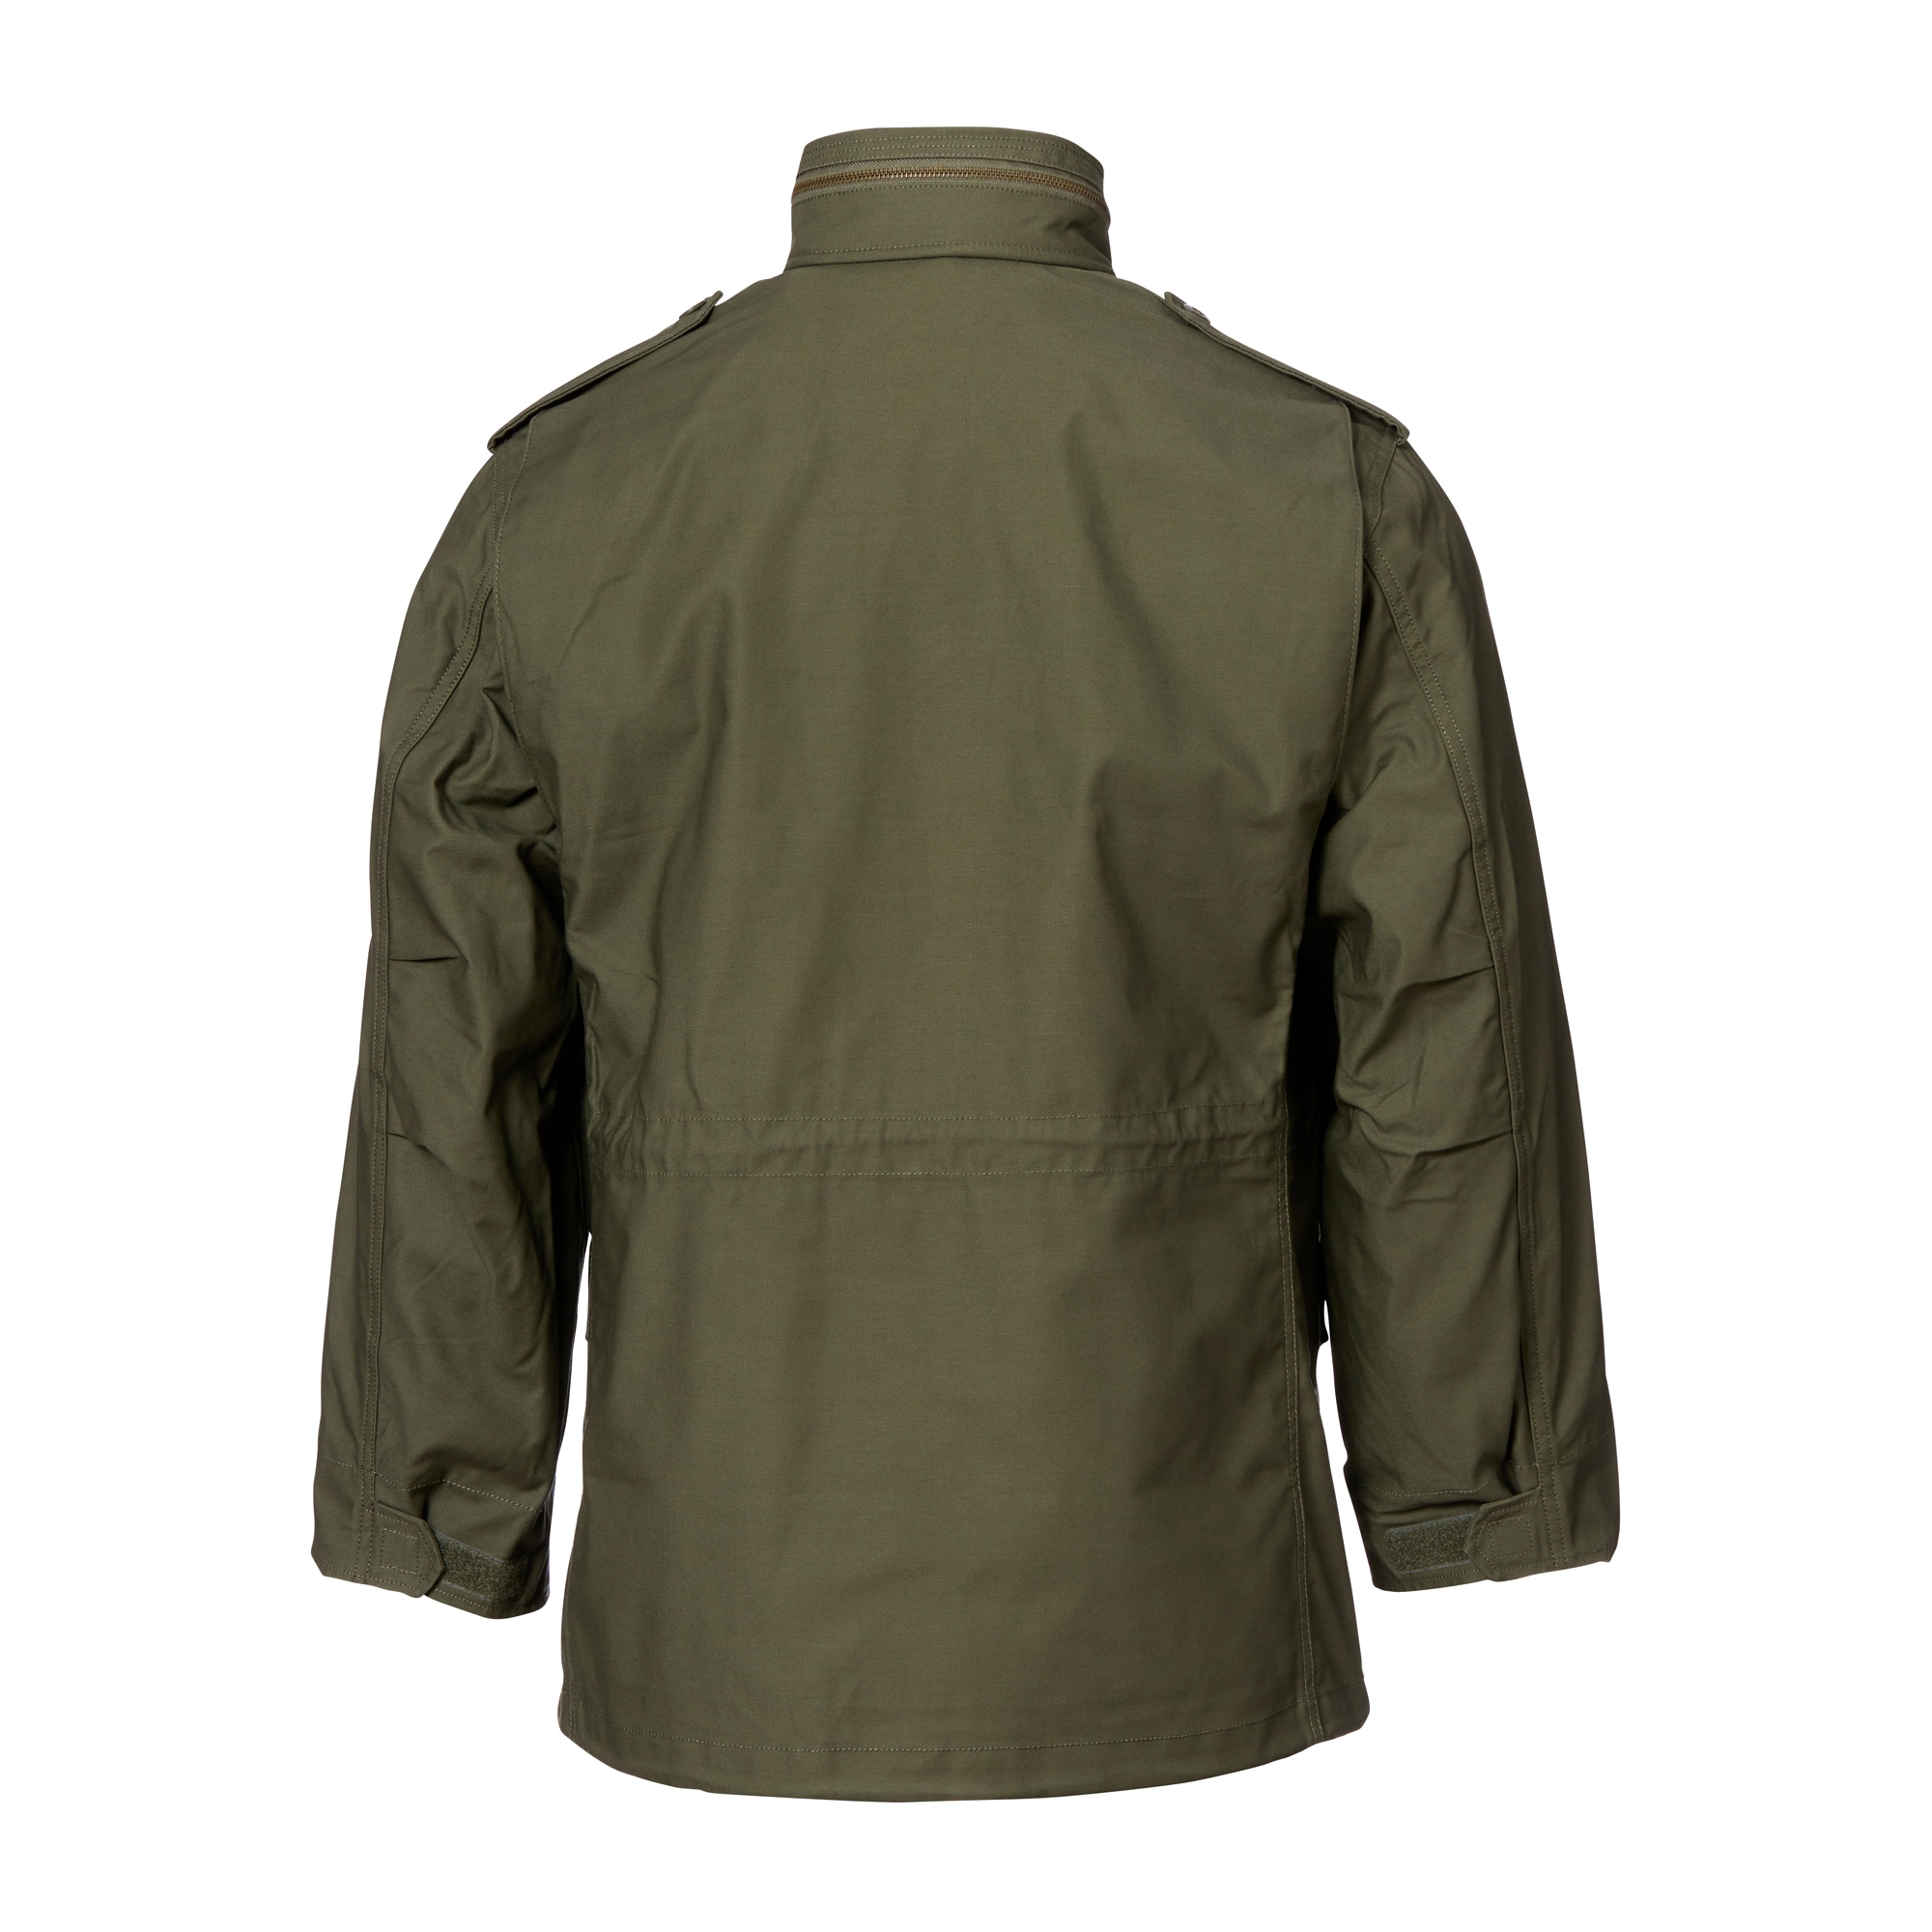 Purchase the Alpha olive Field ASMC M65 by Jacket Industries